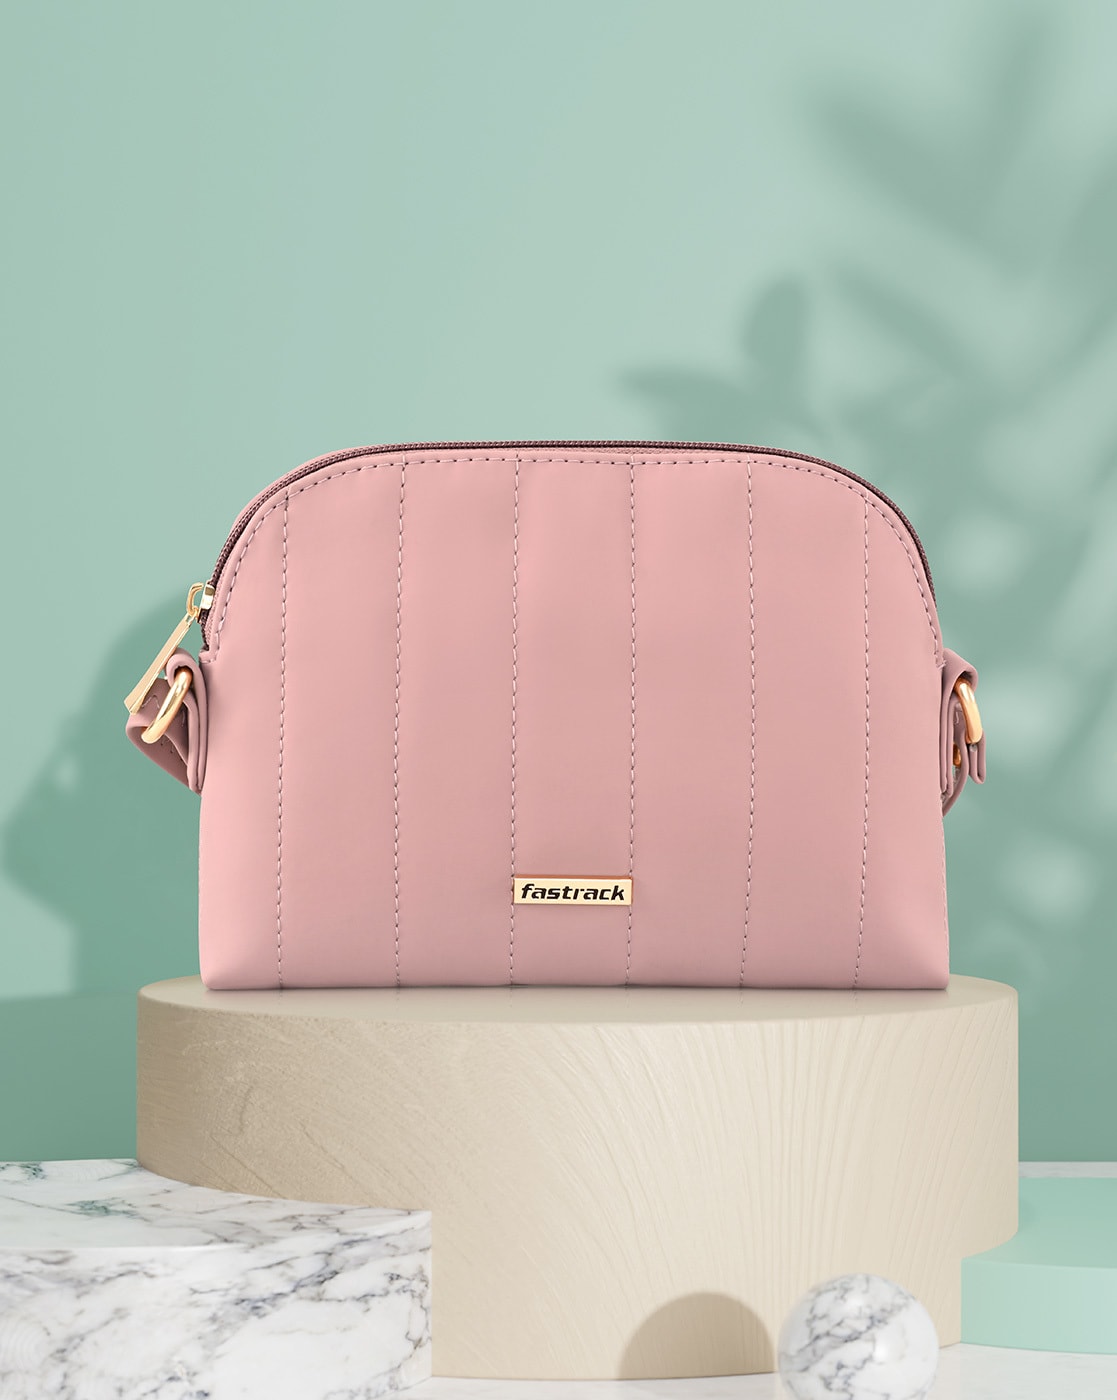 Newly Launched Fastrack Bag Collection | Time for a Treat? Kickstart The  Season With a Brand New Stylish Bag by Fastrack. -Tote Bags -Sling Bags - Backpacks | By FastrackFacebook